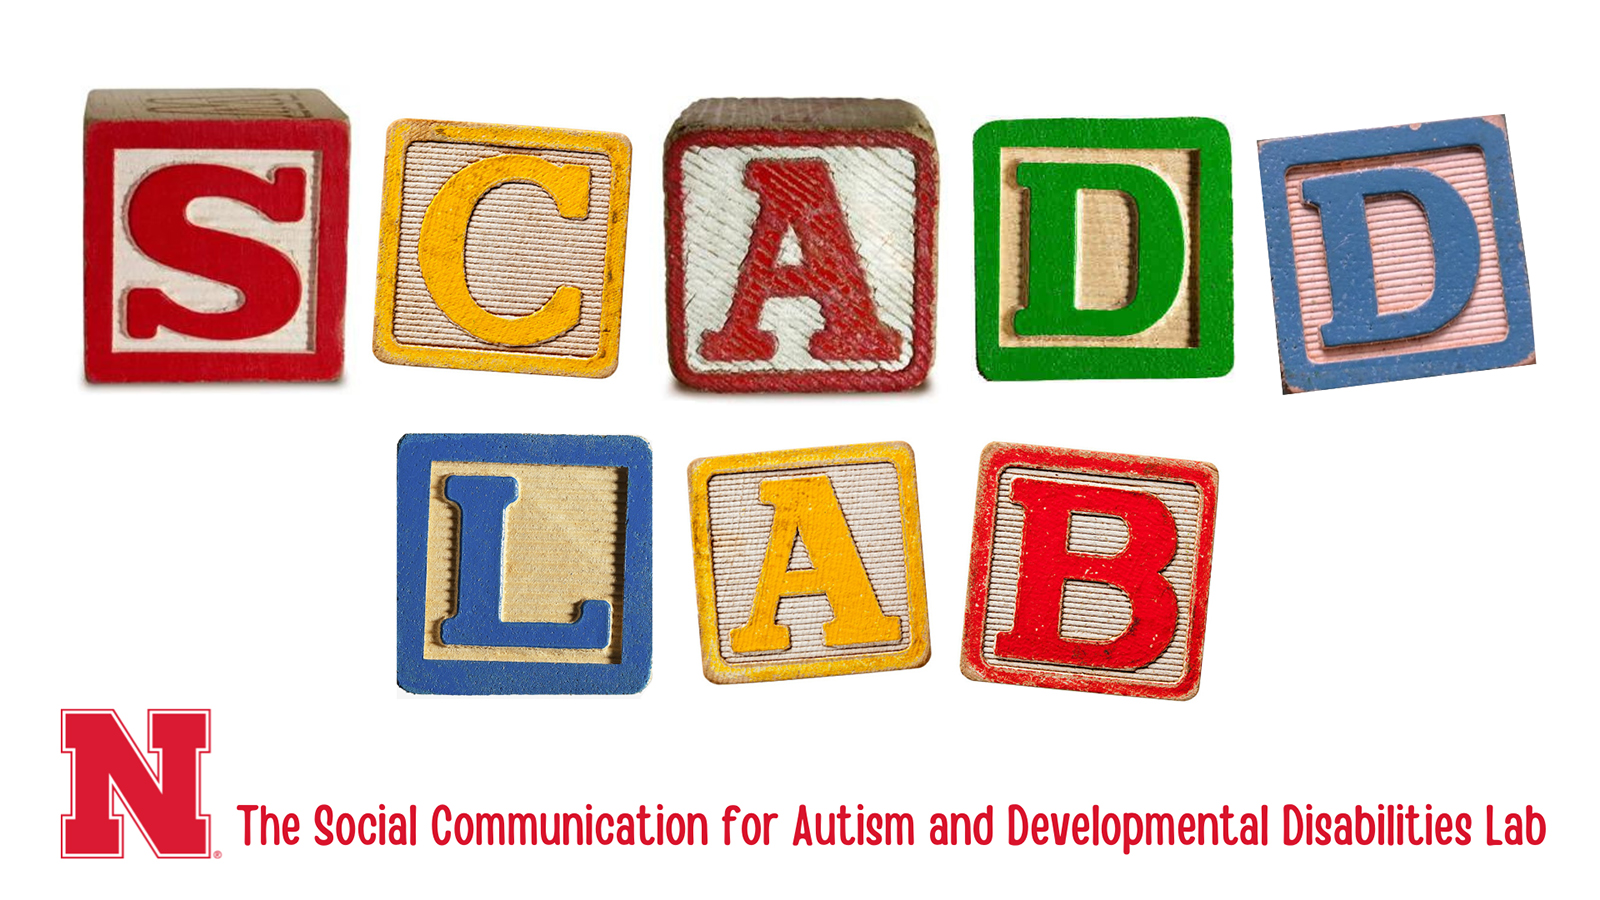 small toy blocks spell out 'SCADD Lab', N logo in lower left corner with text 'The Social Communication for Autism and Developmental Disabilities Lab' across bottom